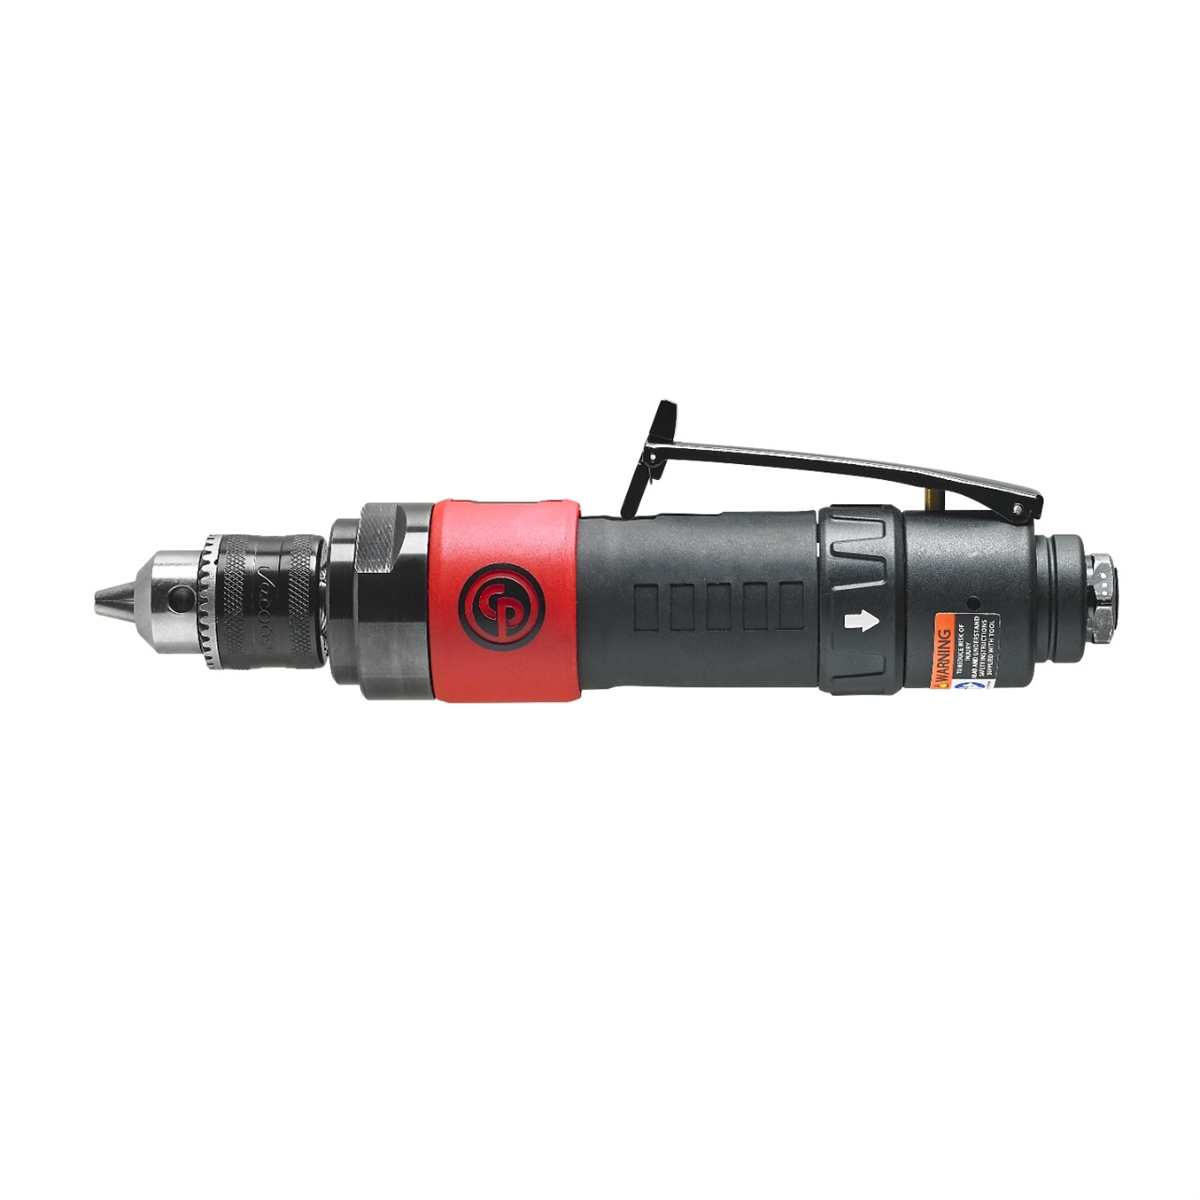 CP887C Inline Reversible 3/8" Key Drill